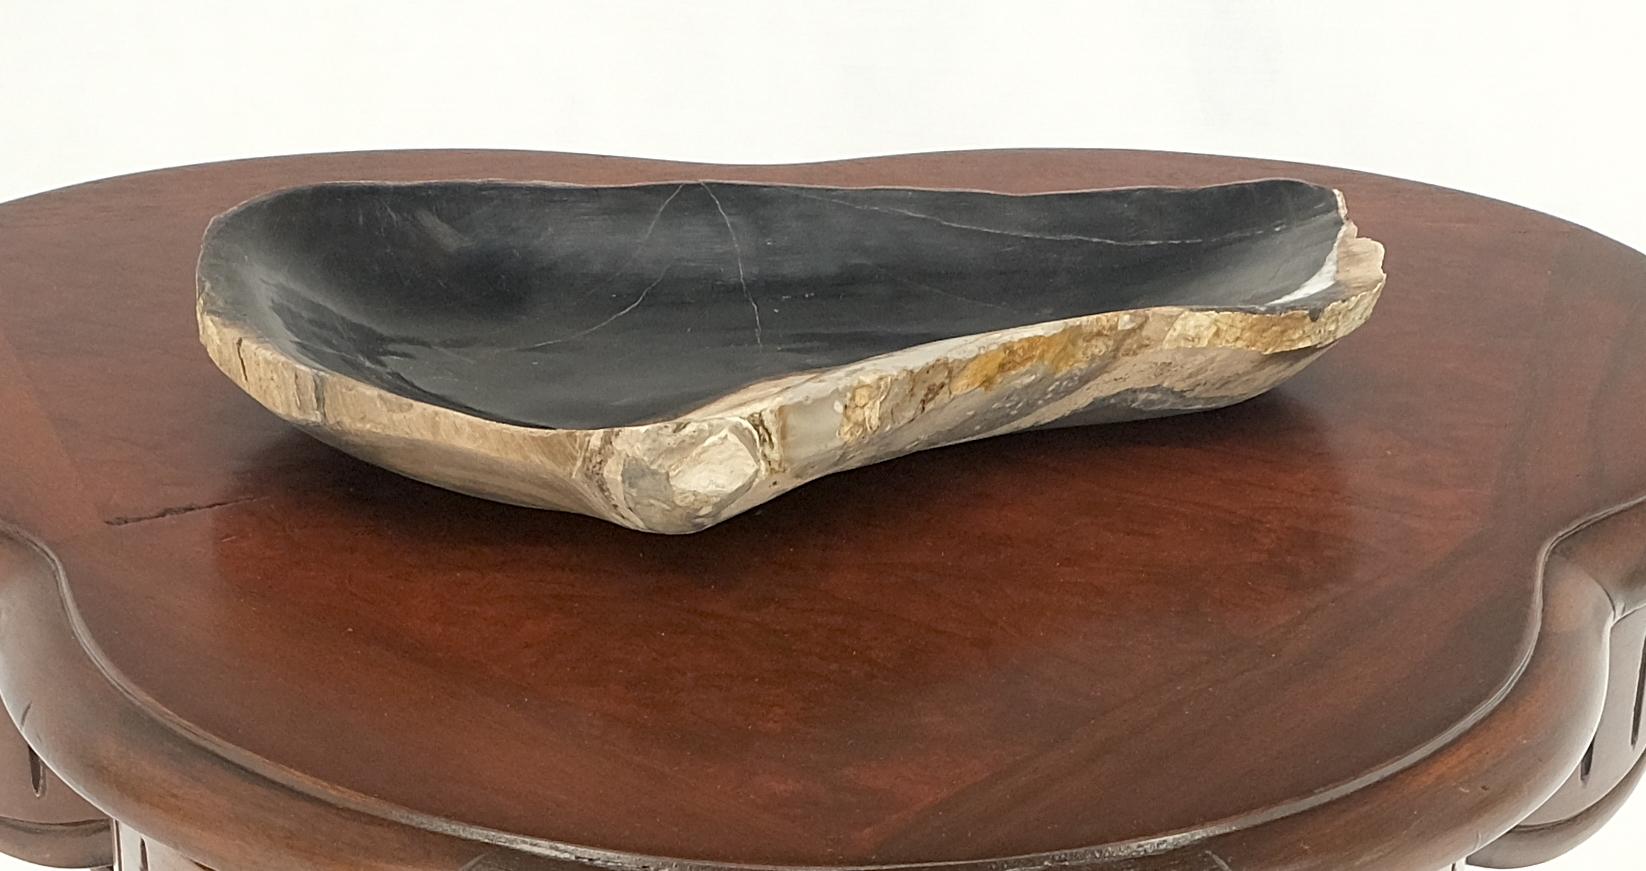 Petrified Wood Oyster Shape Solid Black Elongated Bowl Dish Large Plate Ashtray For Sale 1